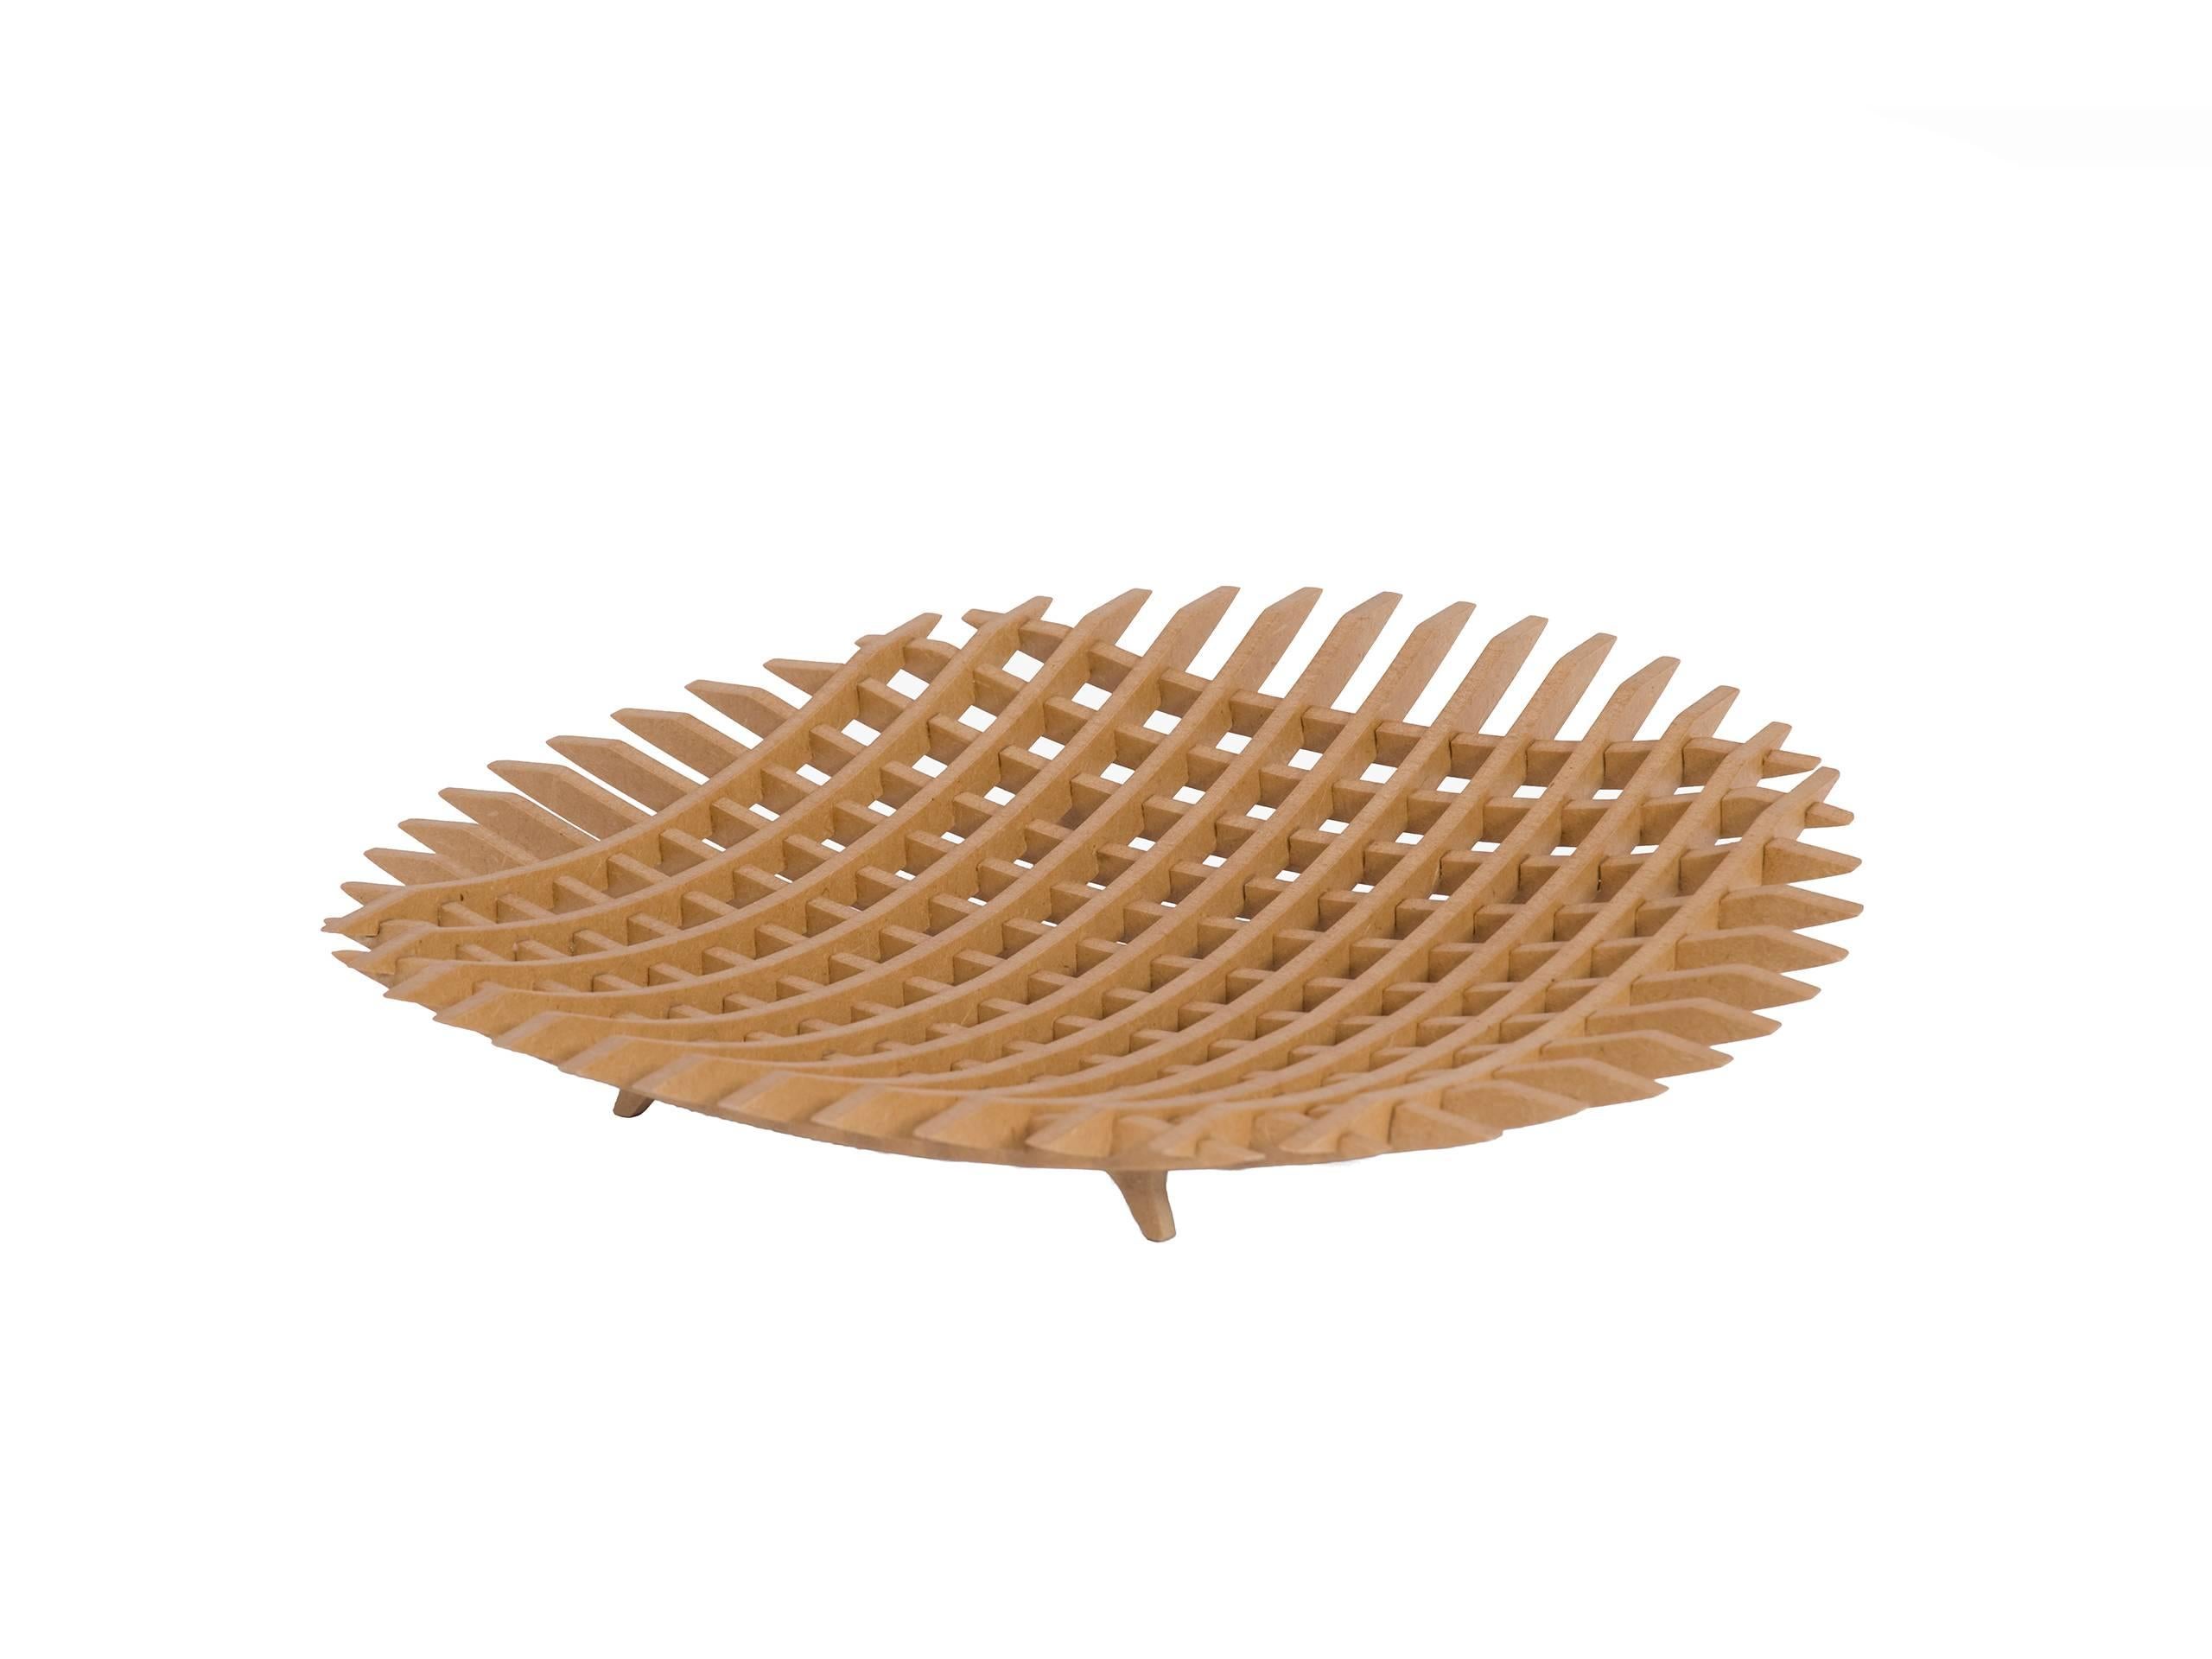 Fruit bowl made up of a sequence of solid wood laths.